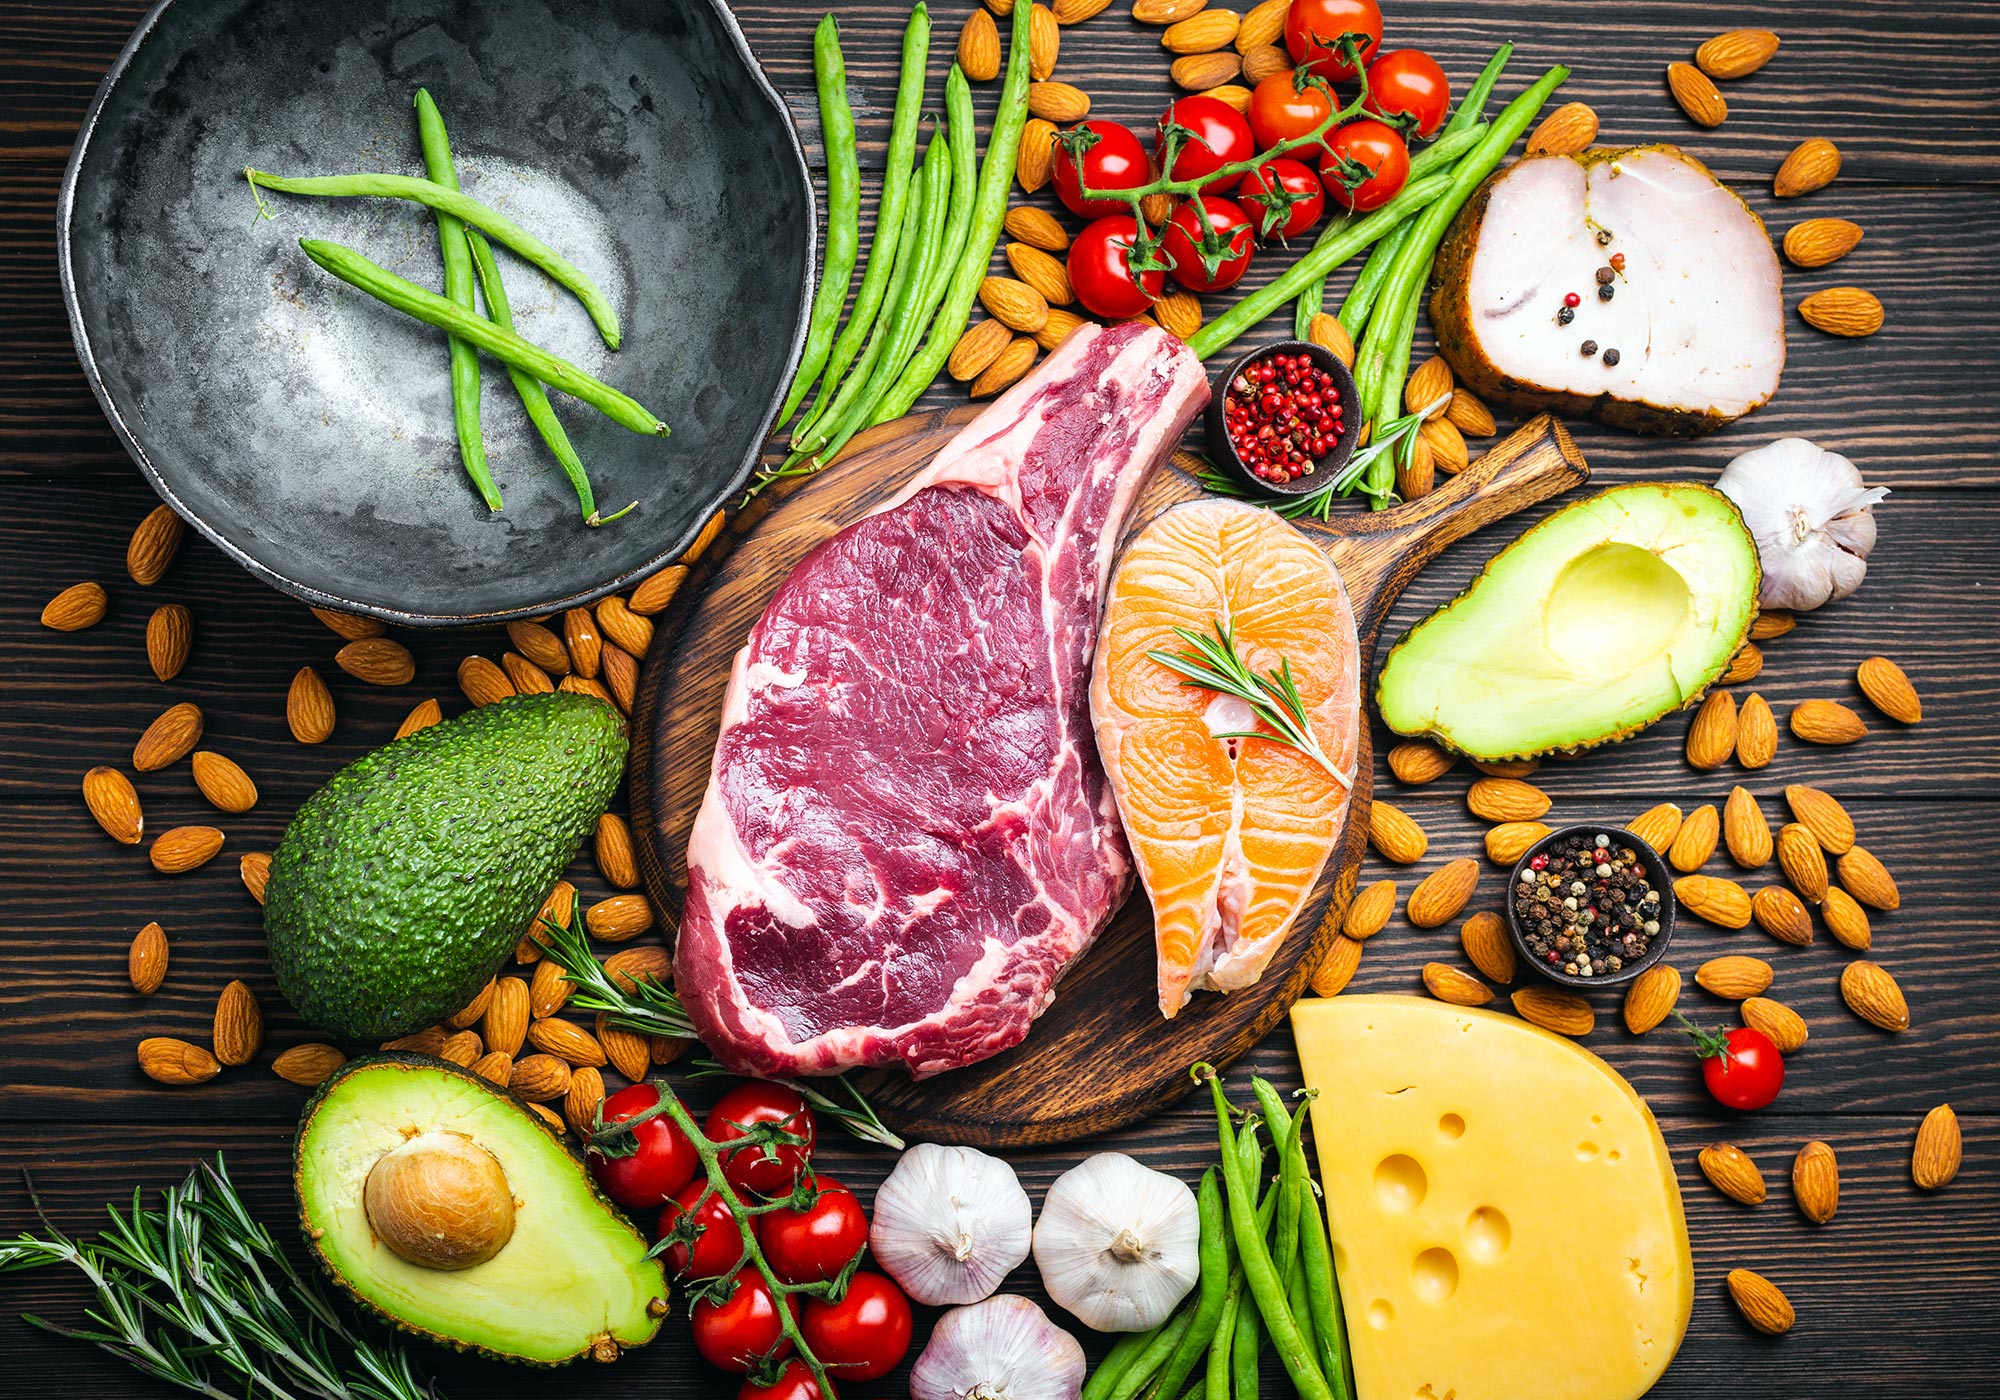 Keto Foods Ideas for Weight Loss